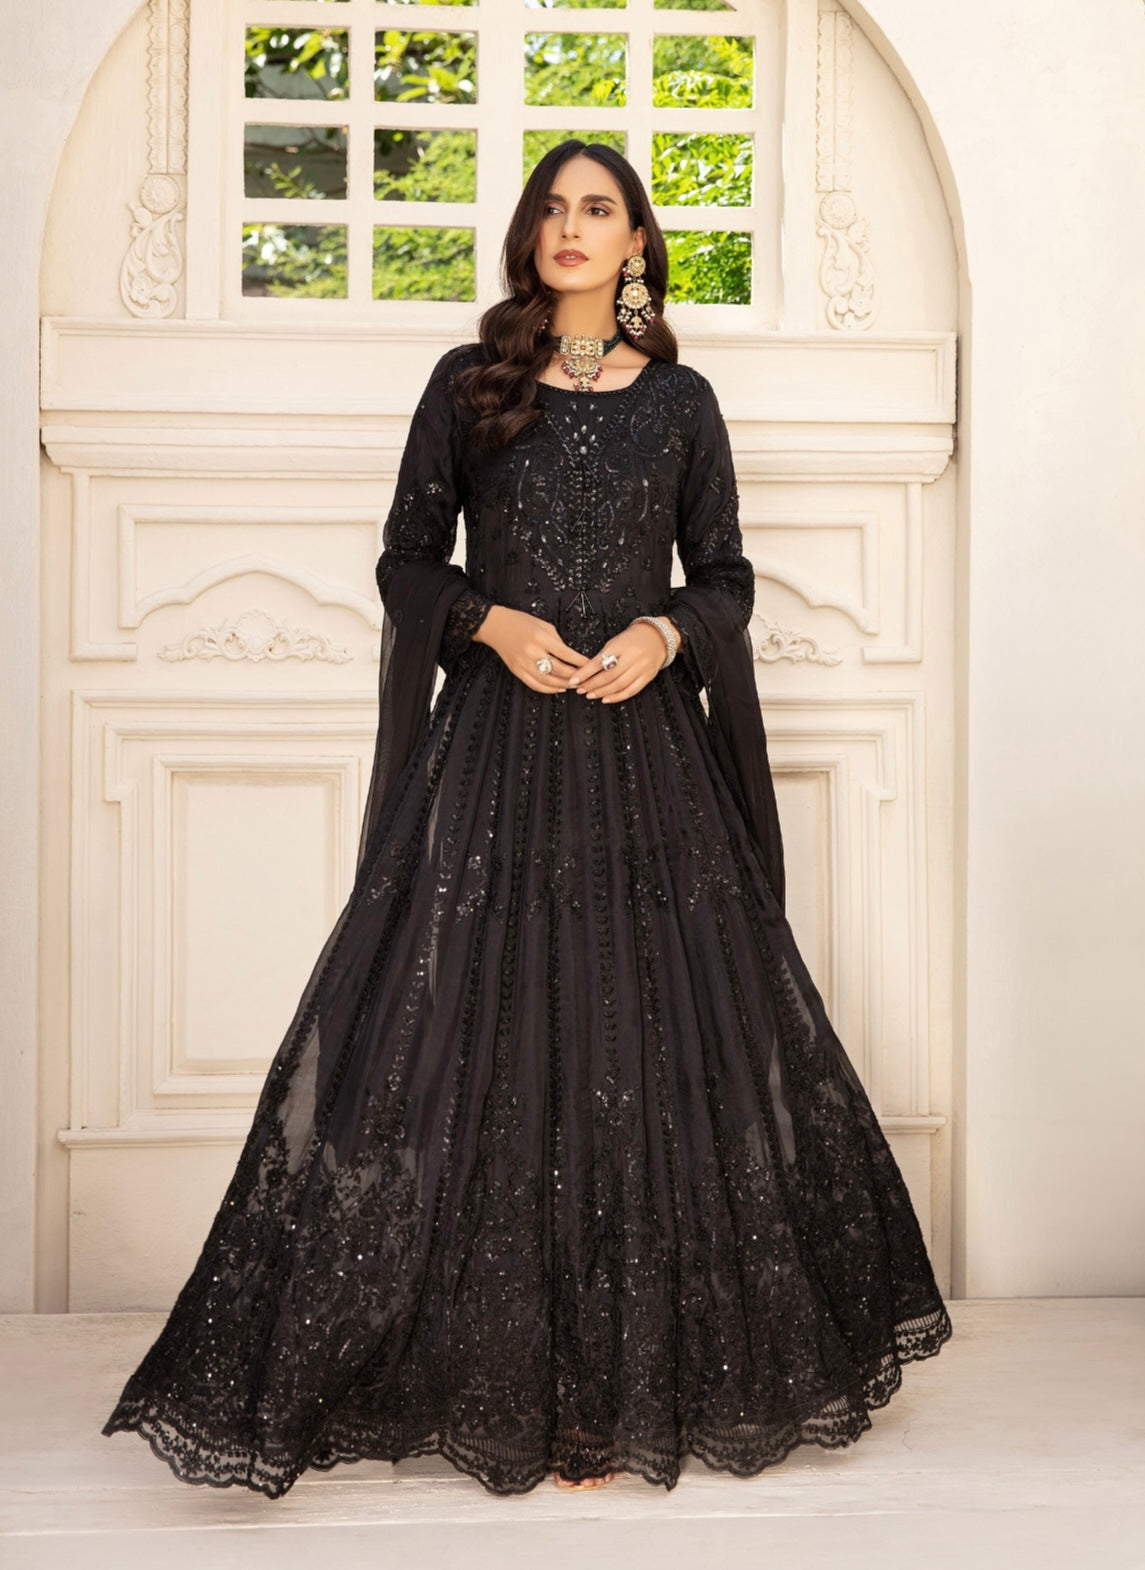 SIMRANS Ivana 3 piece chiffon black embroidered suit ICD-002